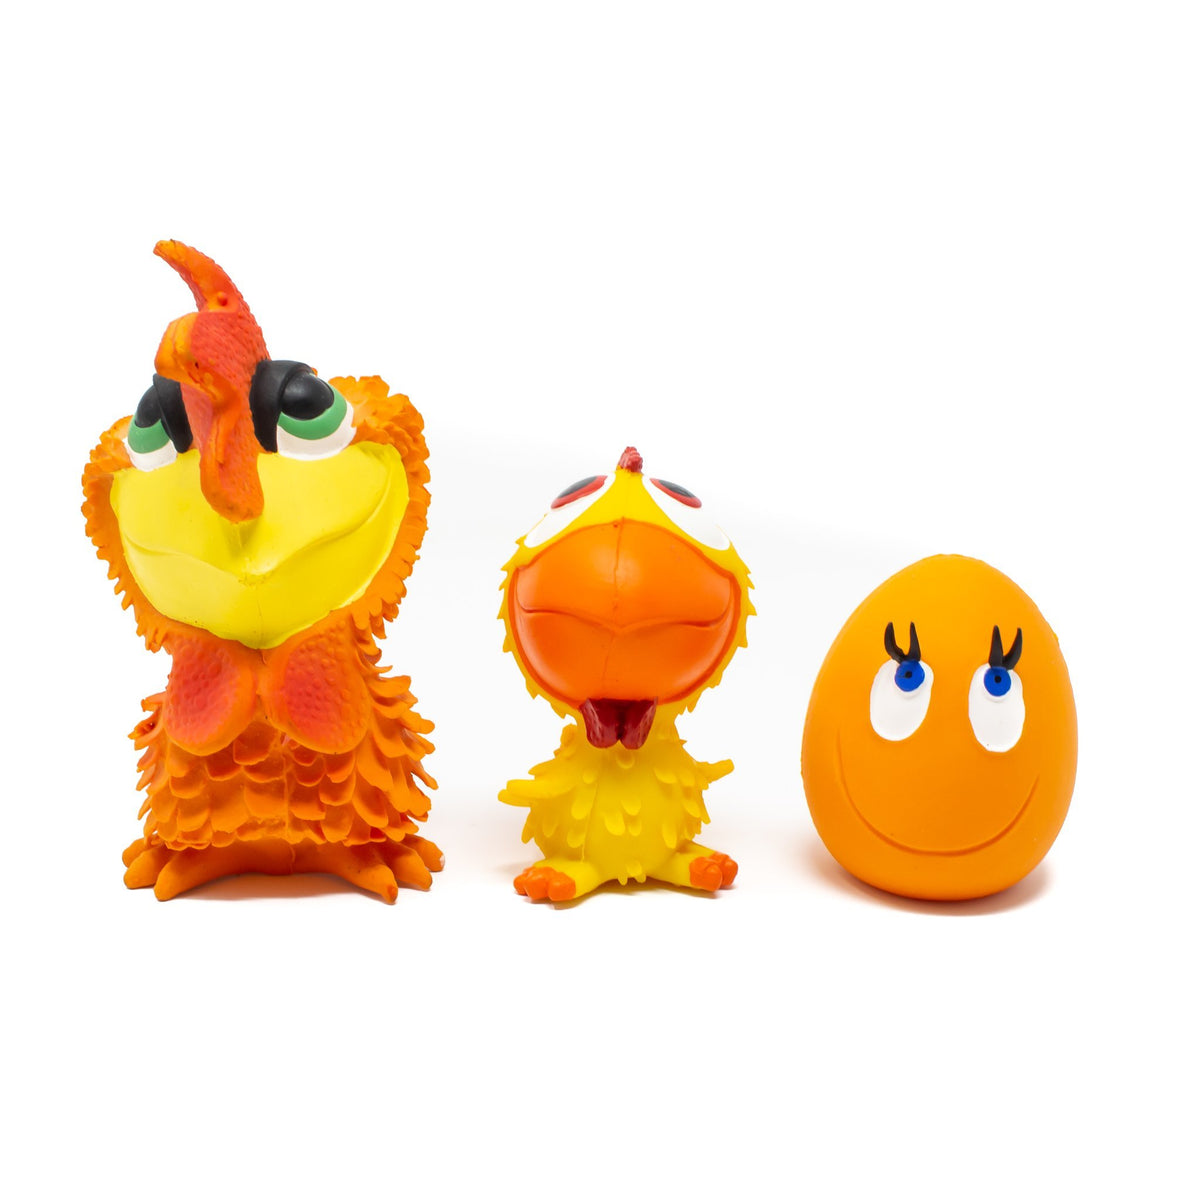 Pet 3-Set (OVO the Egg, Chick and Cockerel) - Natural Rubber Toys